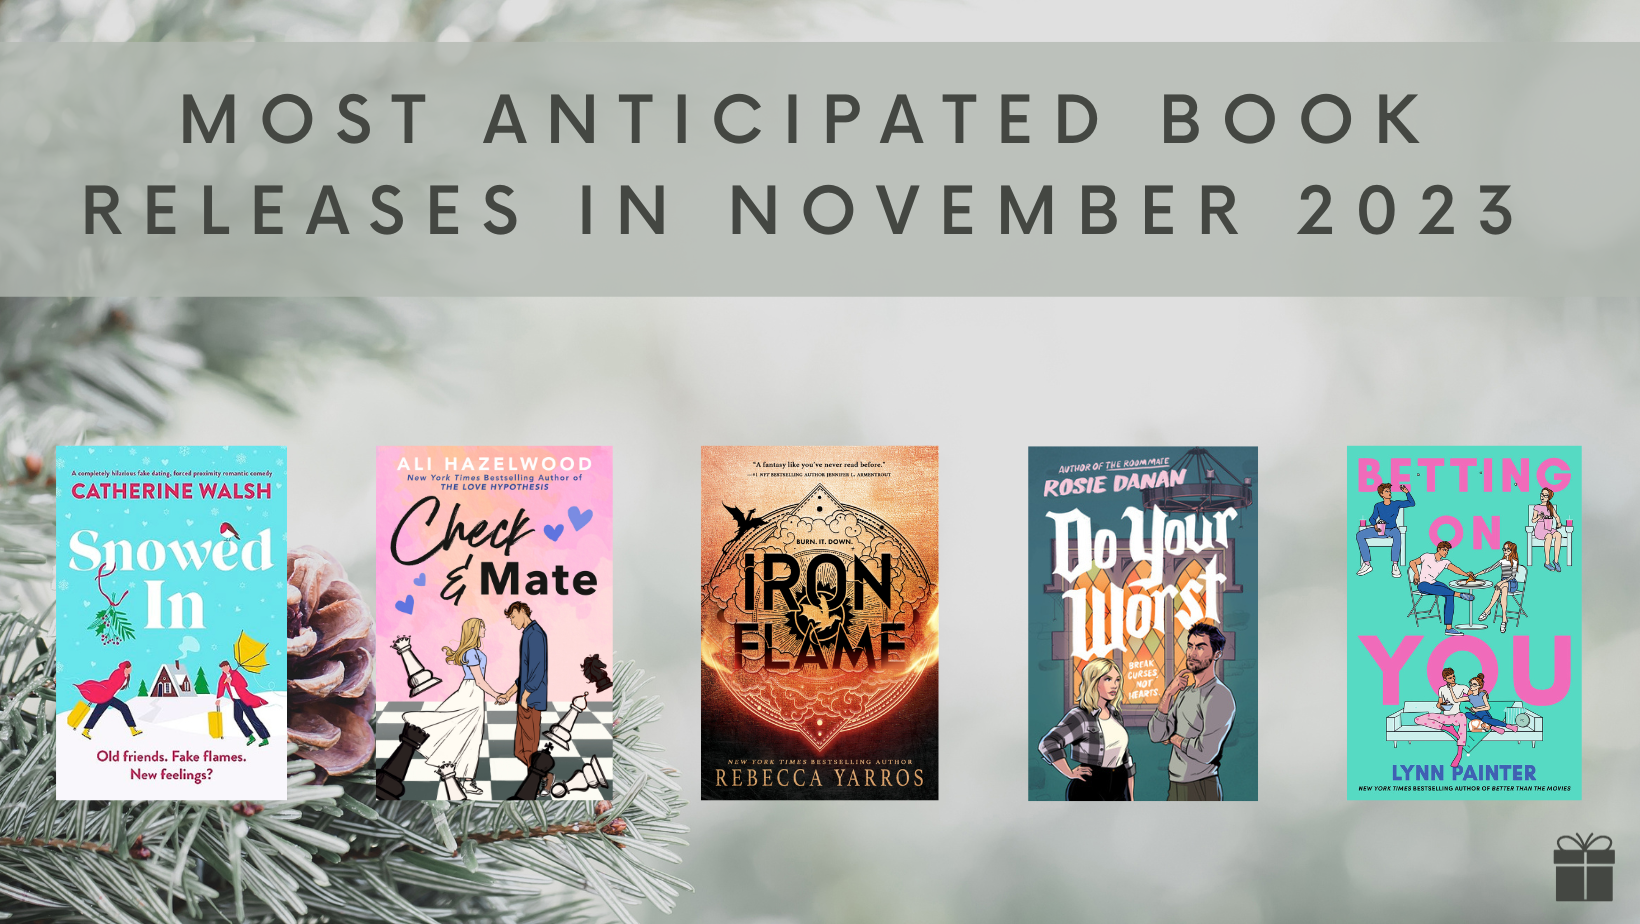 22 Most Anticipated New December 2023 Book Releases by Genre